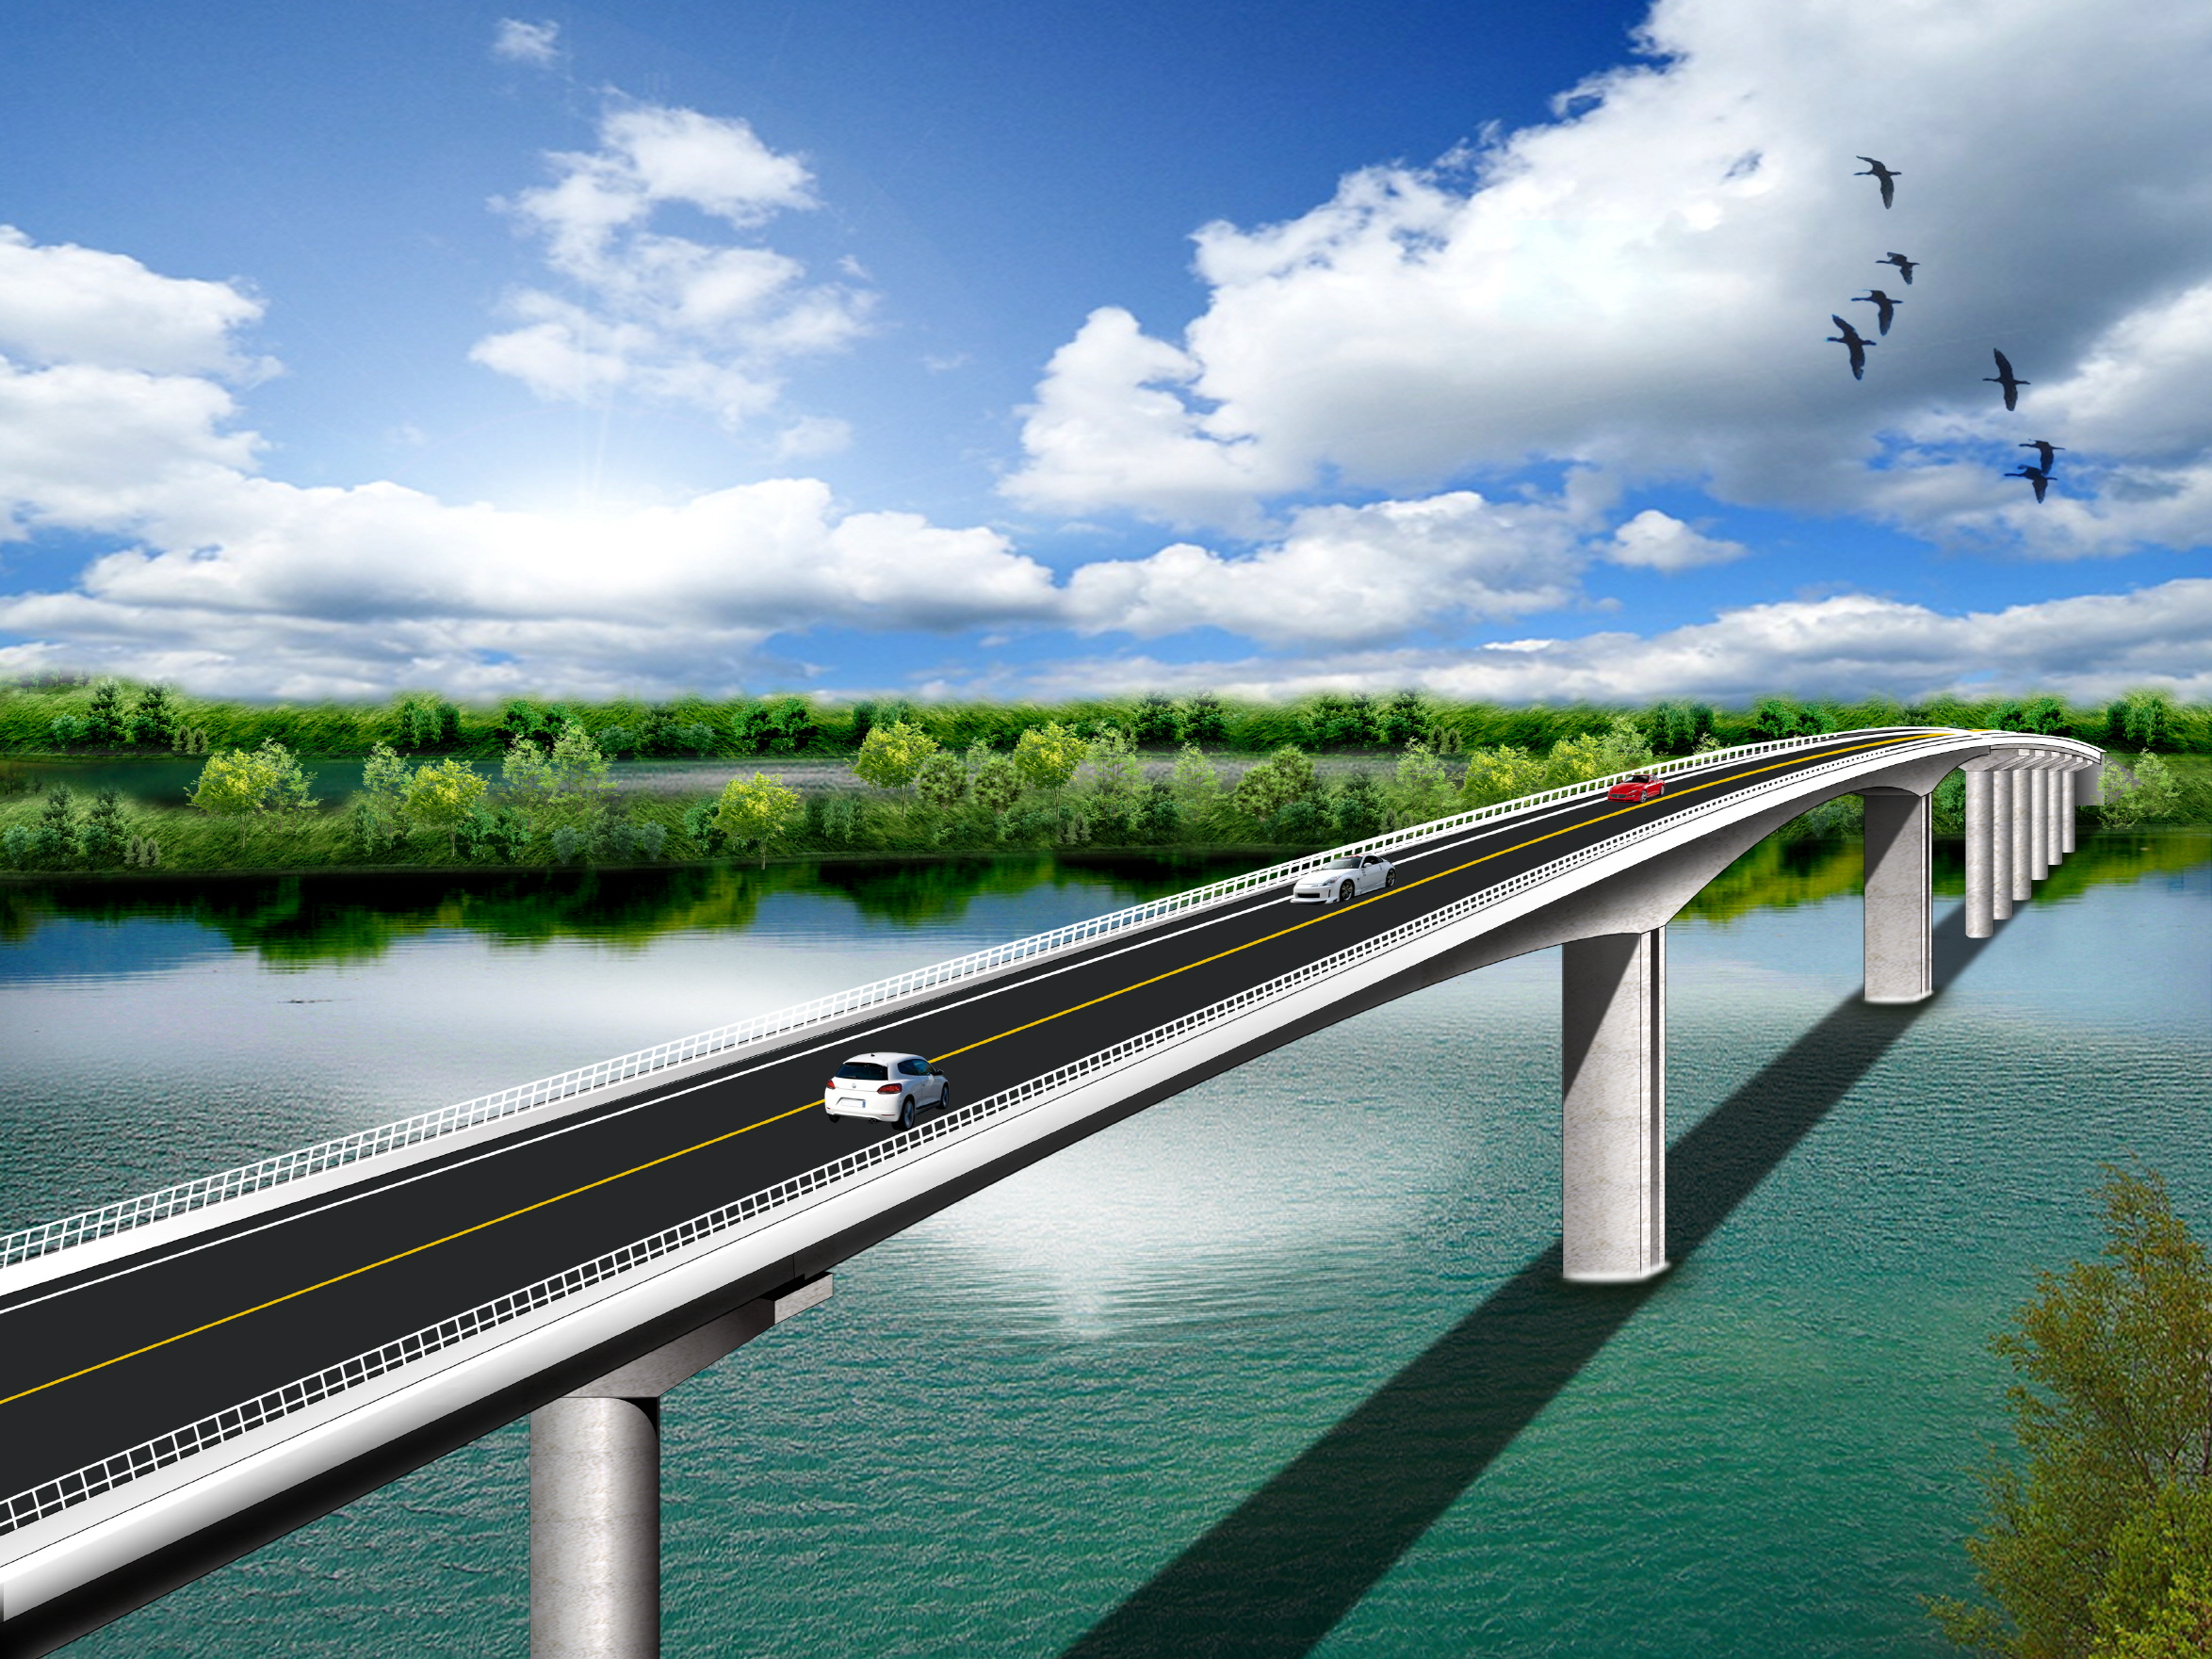 Feasibility Study and Preliminary Design for Construction of Thinh Long Bridge in Vietnam